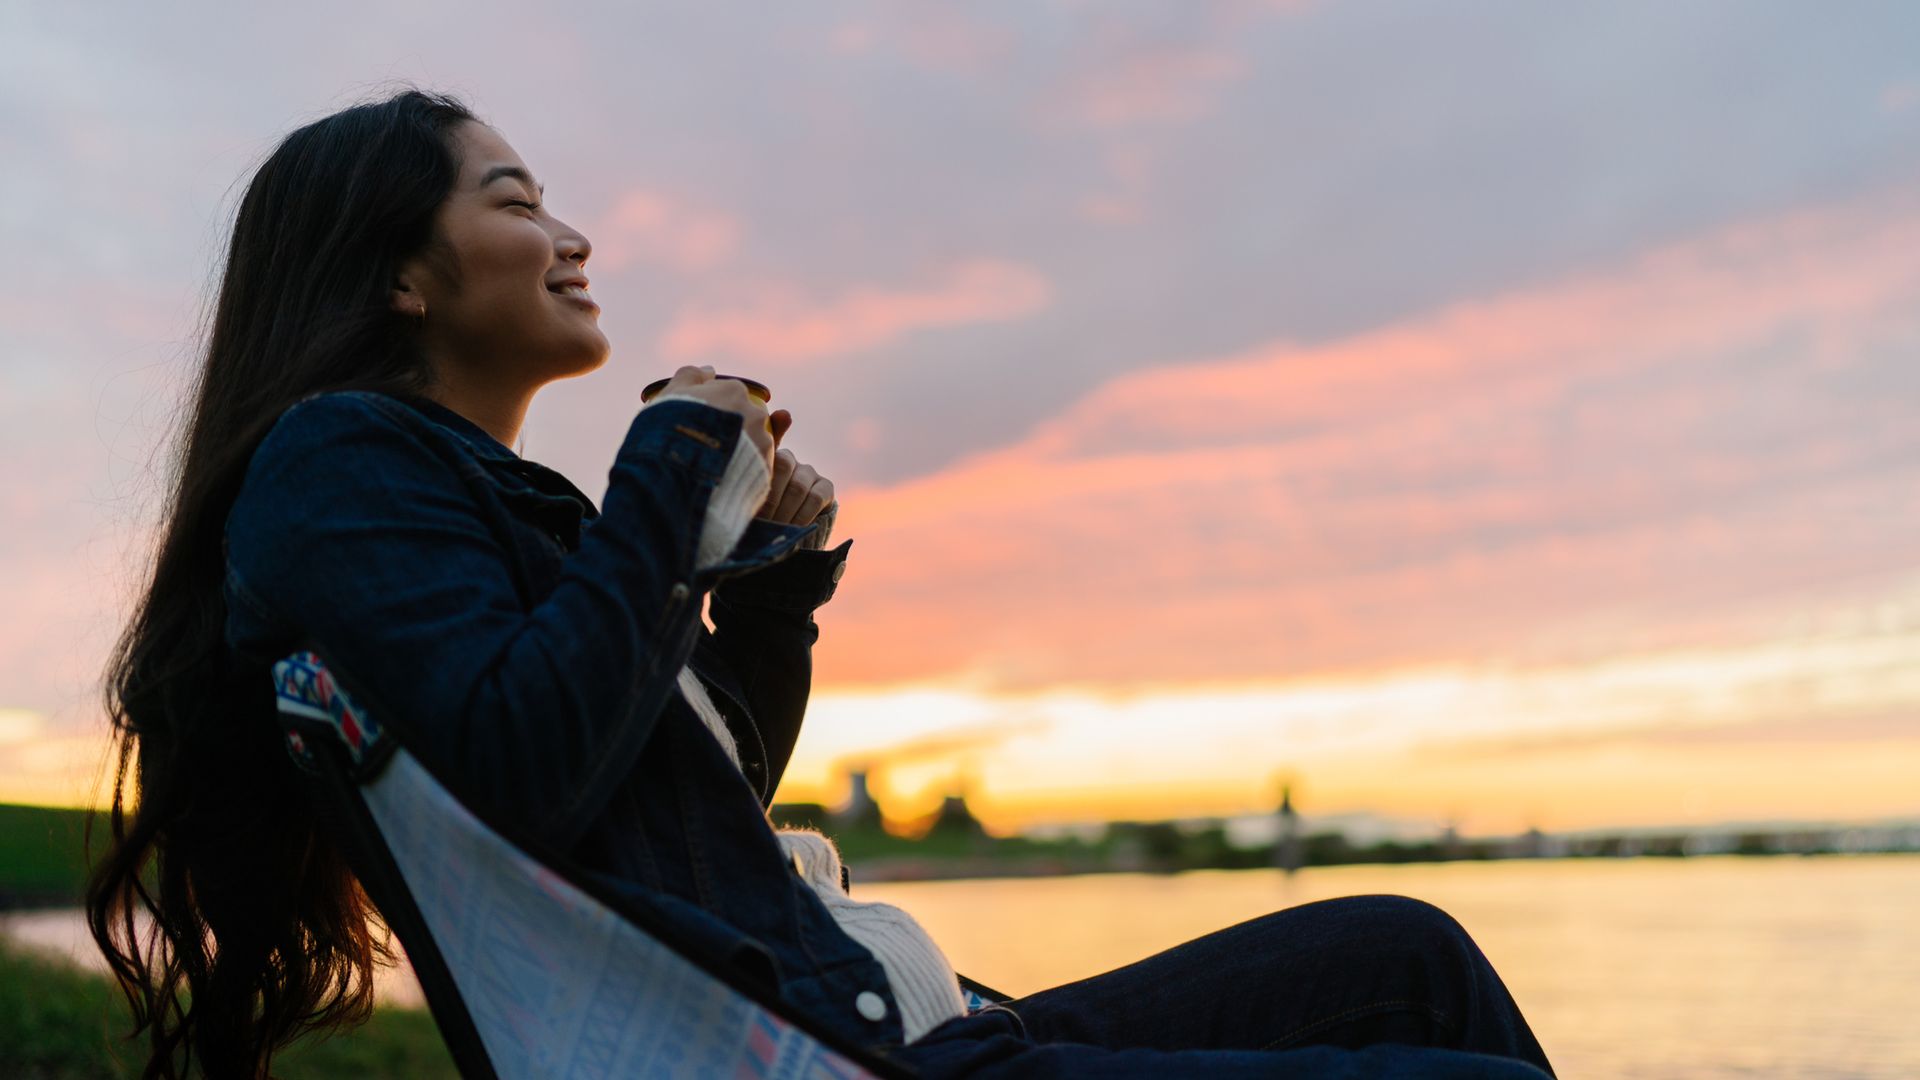 A young woman is enjoying sitting near a lake and drinking a hot drink in nature during sunset.